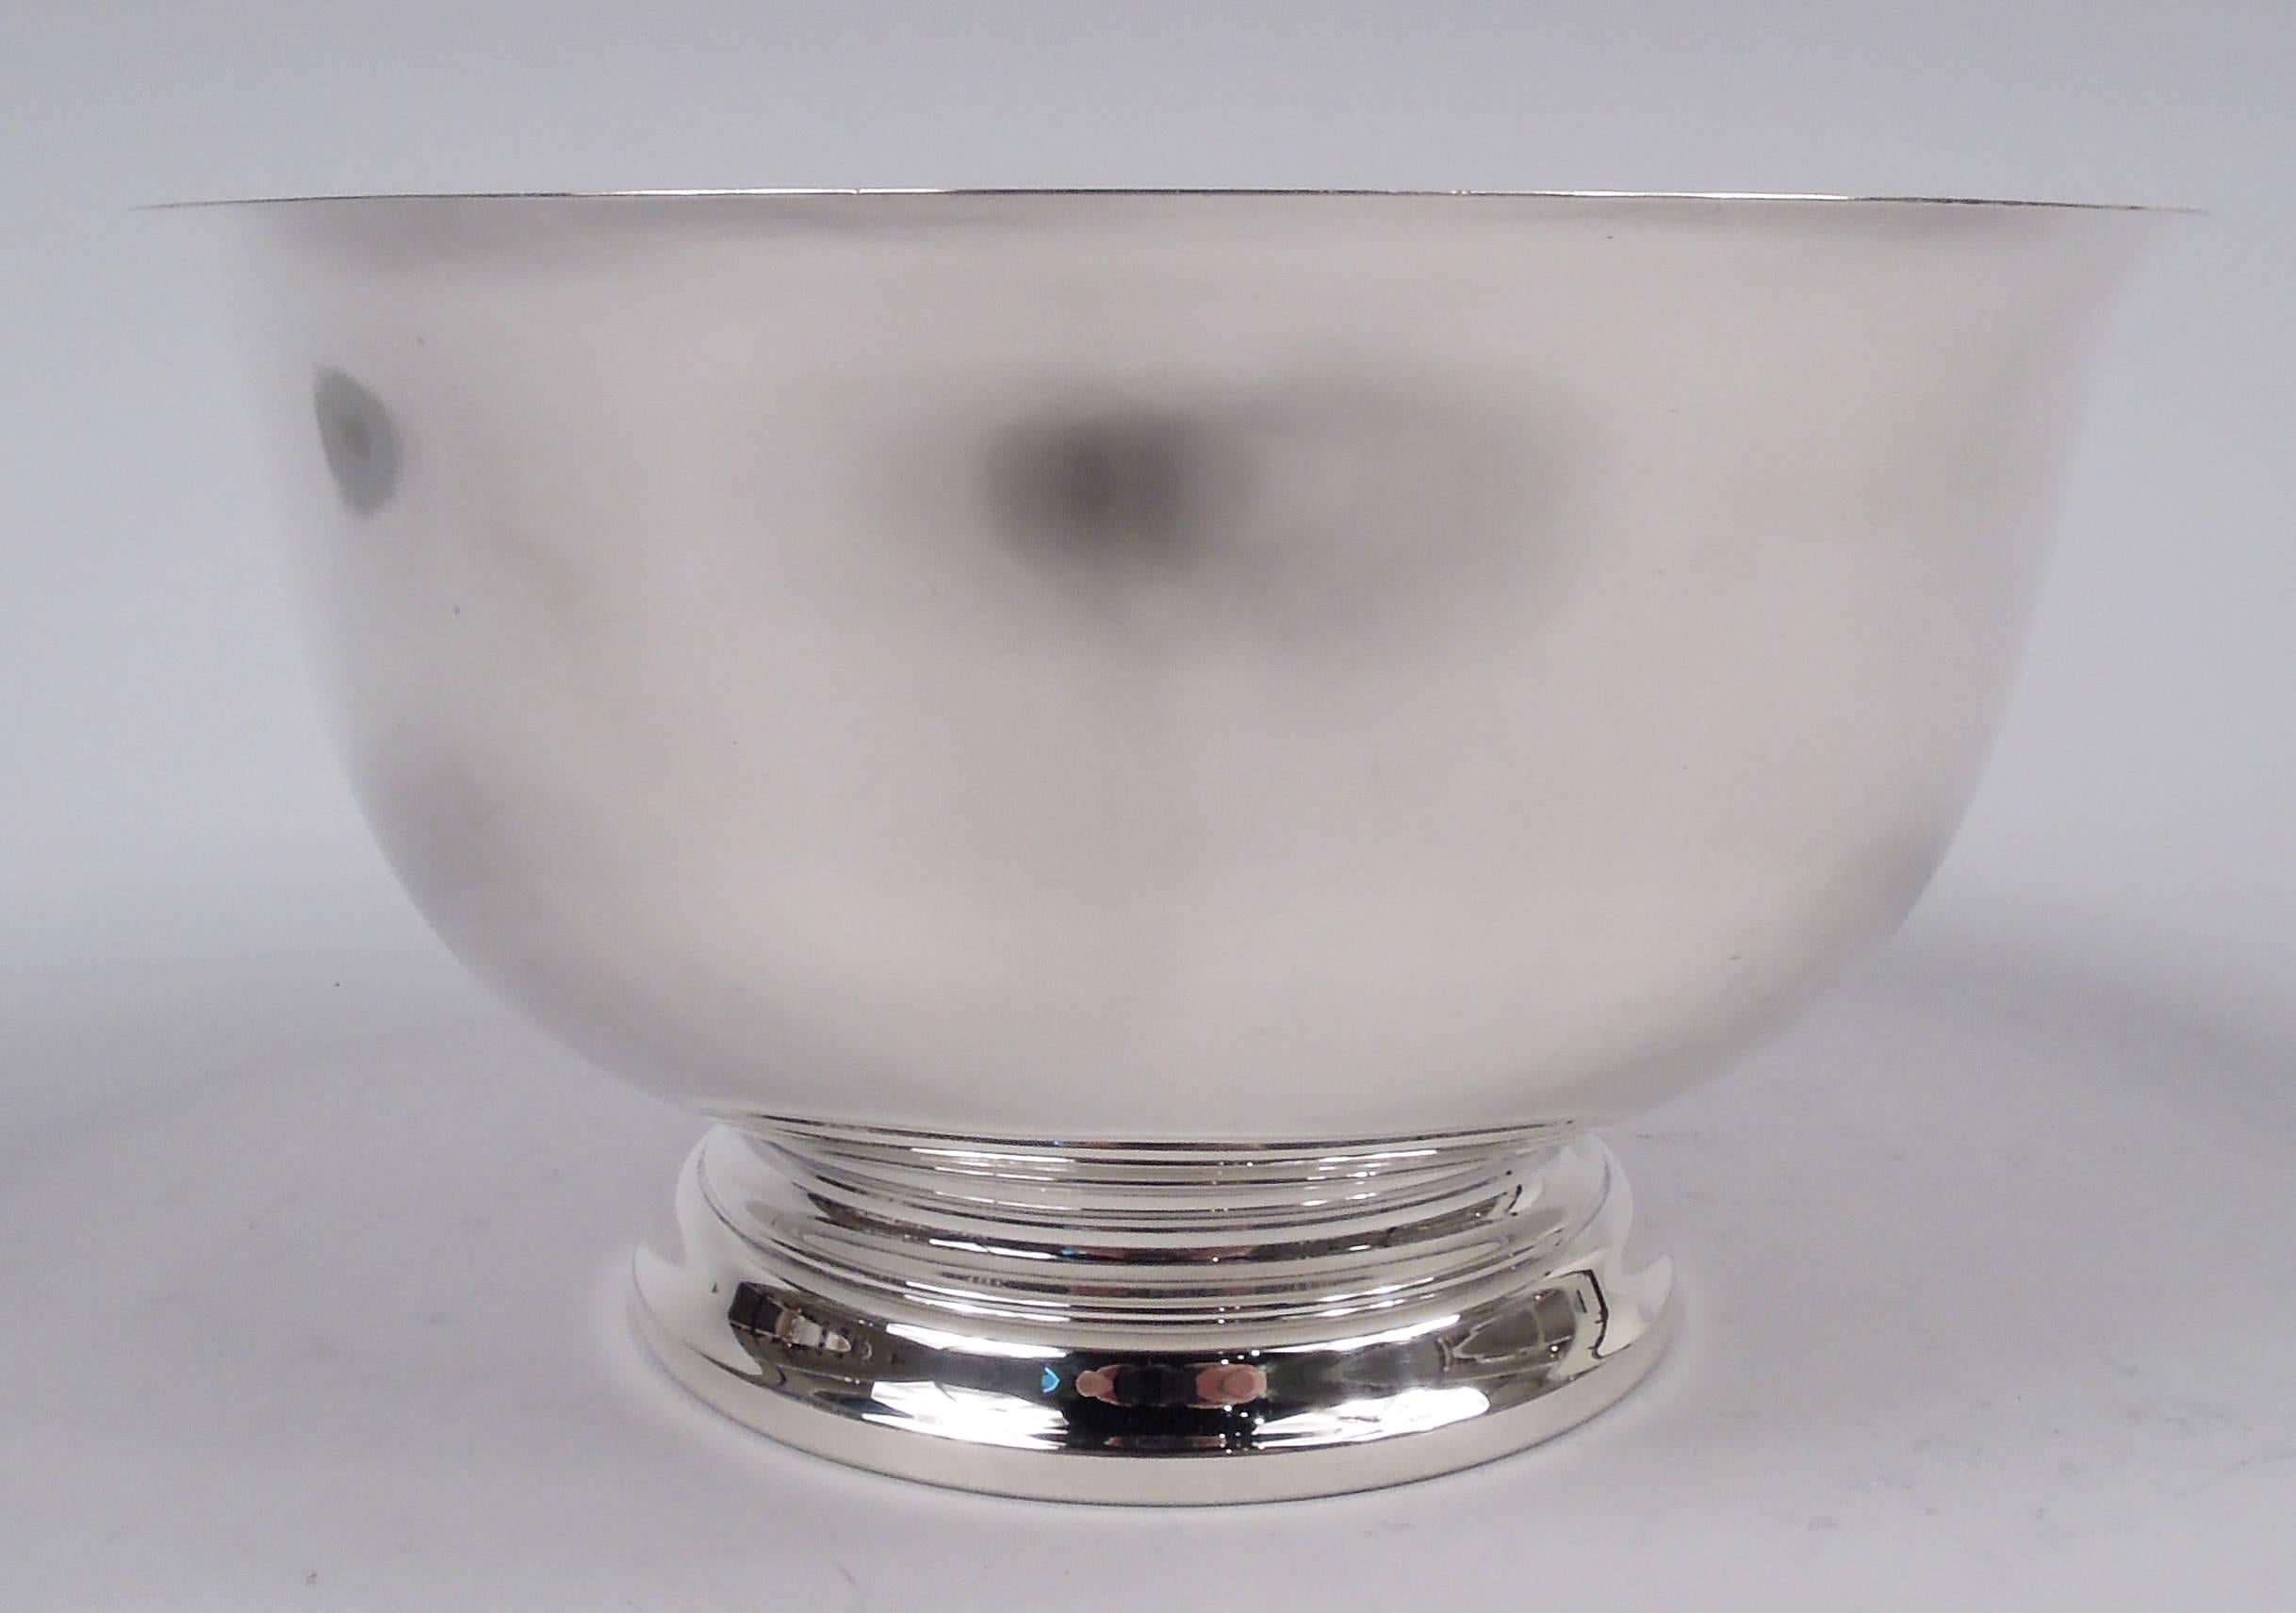 Traditional sterling silver Revere bowl. Made by Gorham in Providence in 1945. Curved sides, flared rim, and stepped foot. A historic form that can suit many modern uses. Fully marked including maker’s stamp, date code, no. 41659, and phrase “P.